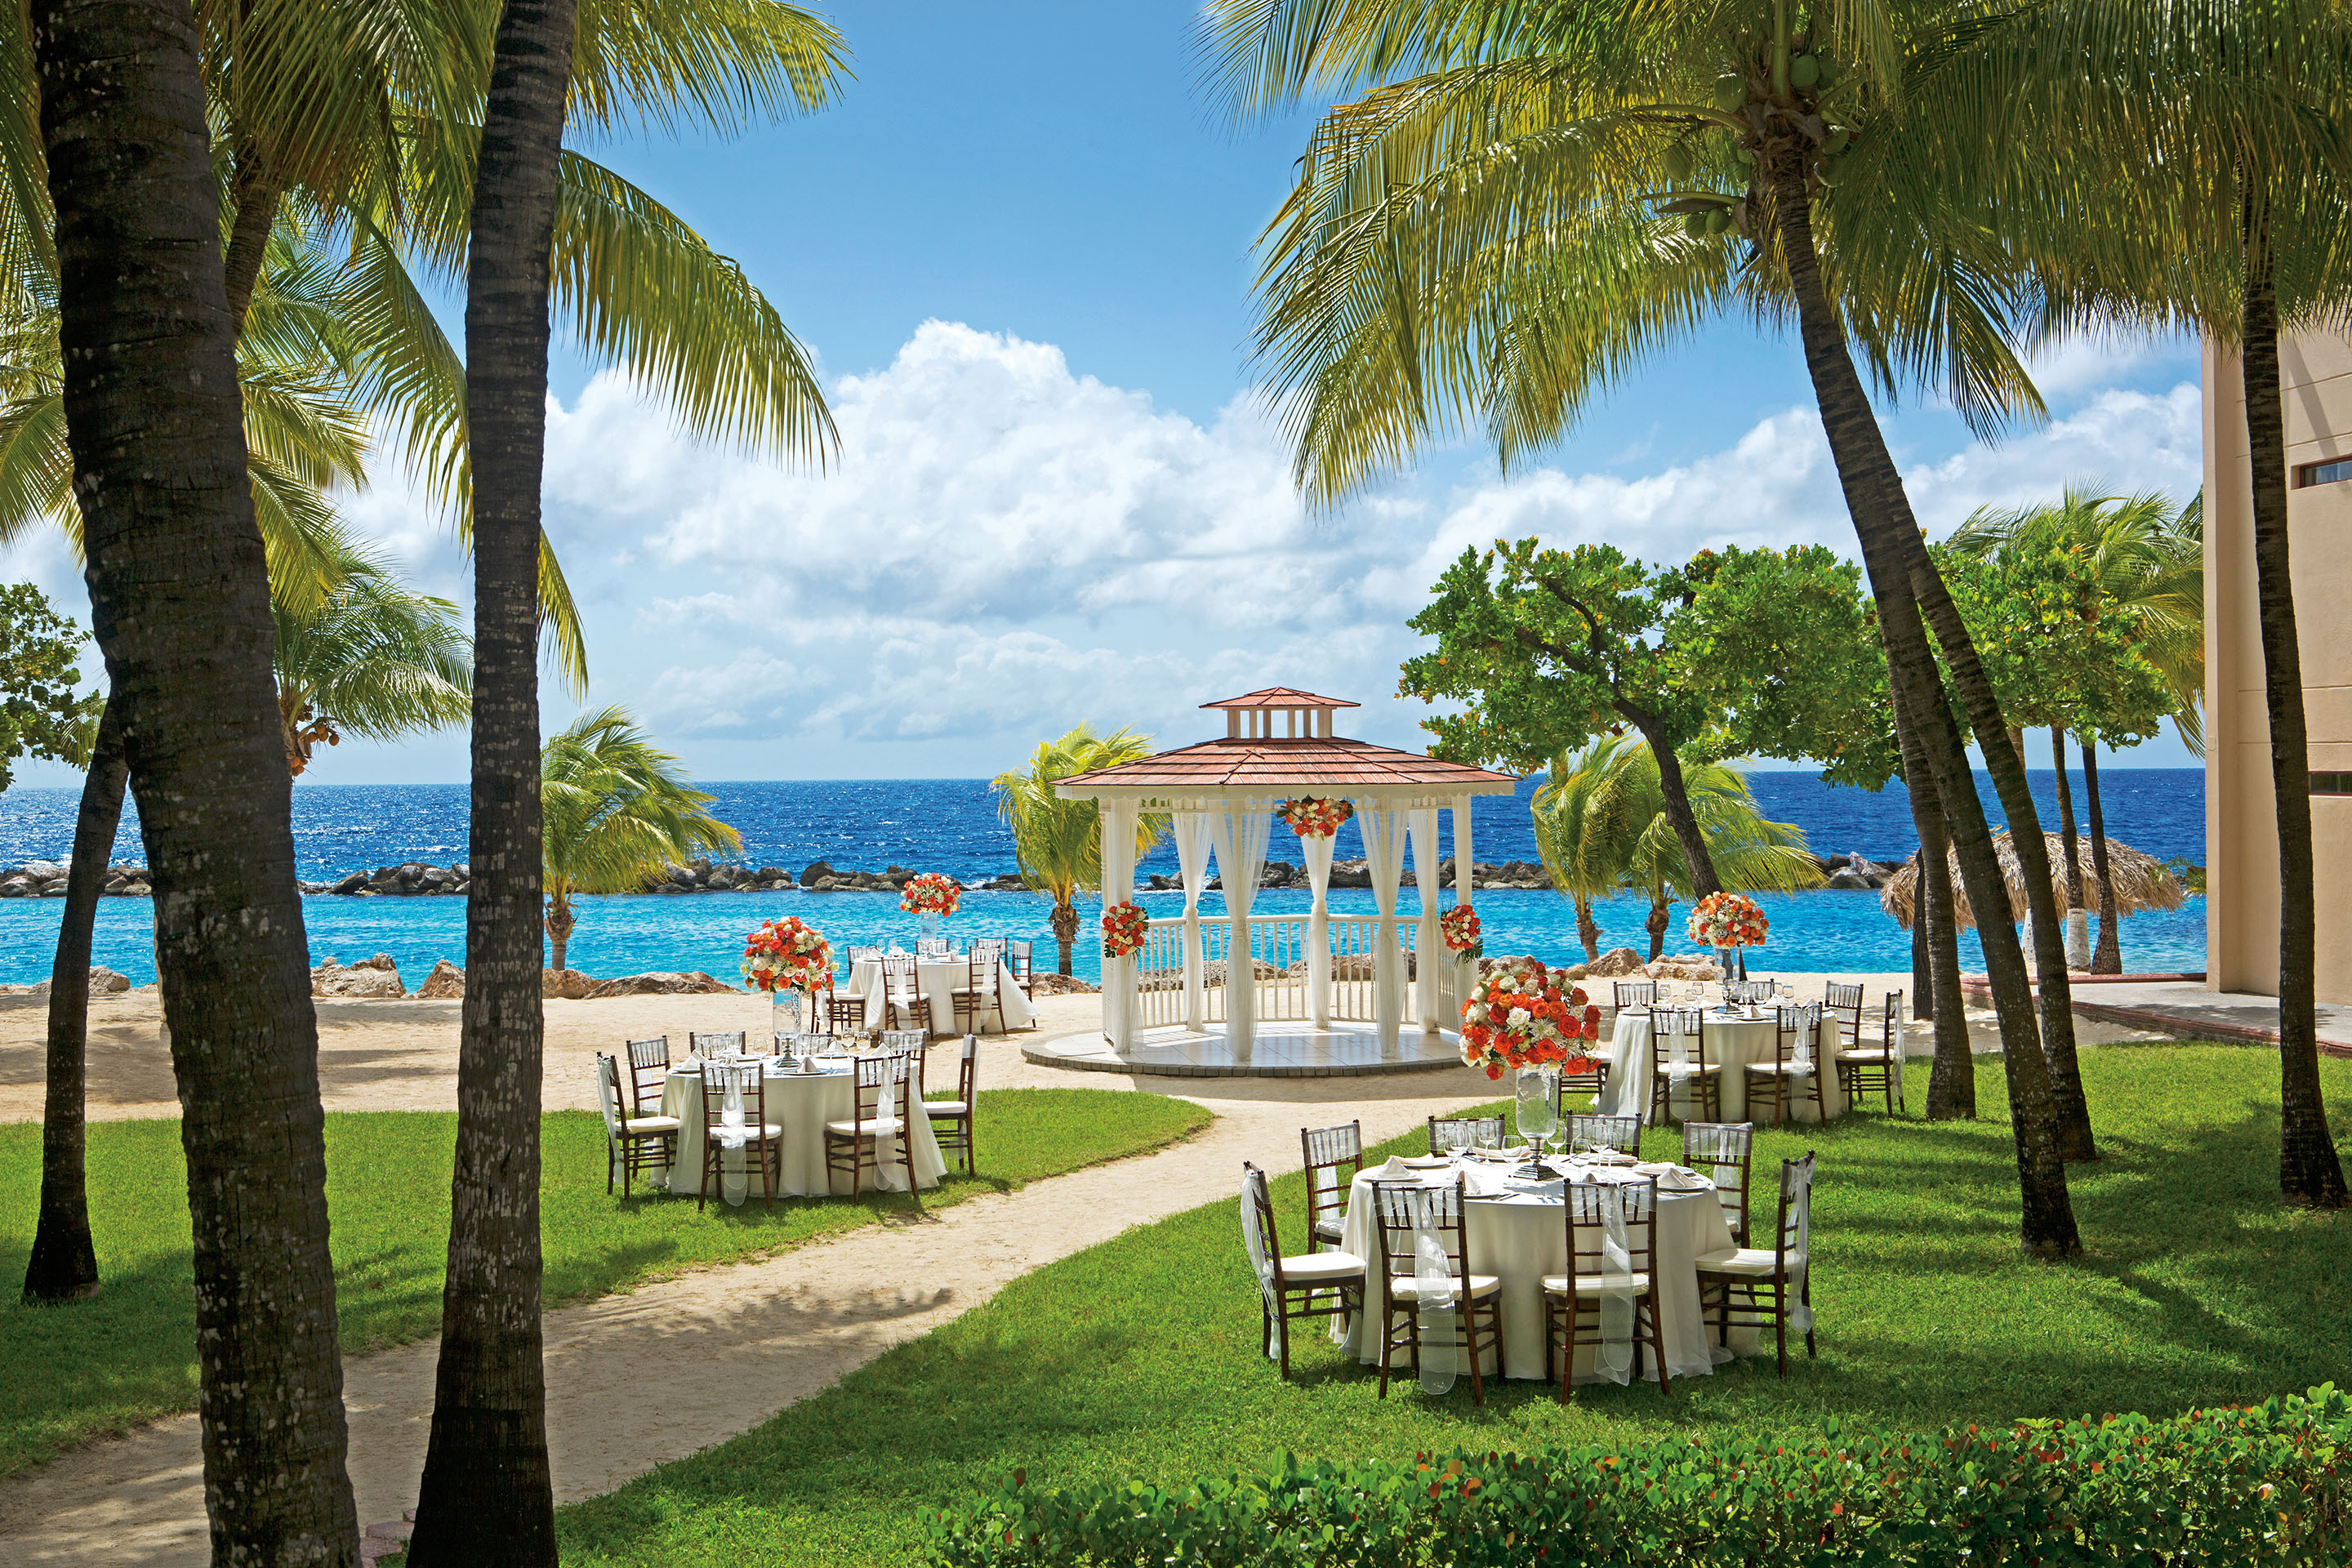 Romantic wedding gazebo and tables set in secluded area.  Surrounded by palm trees and set along a bright blue oceanscape.